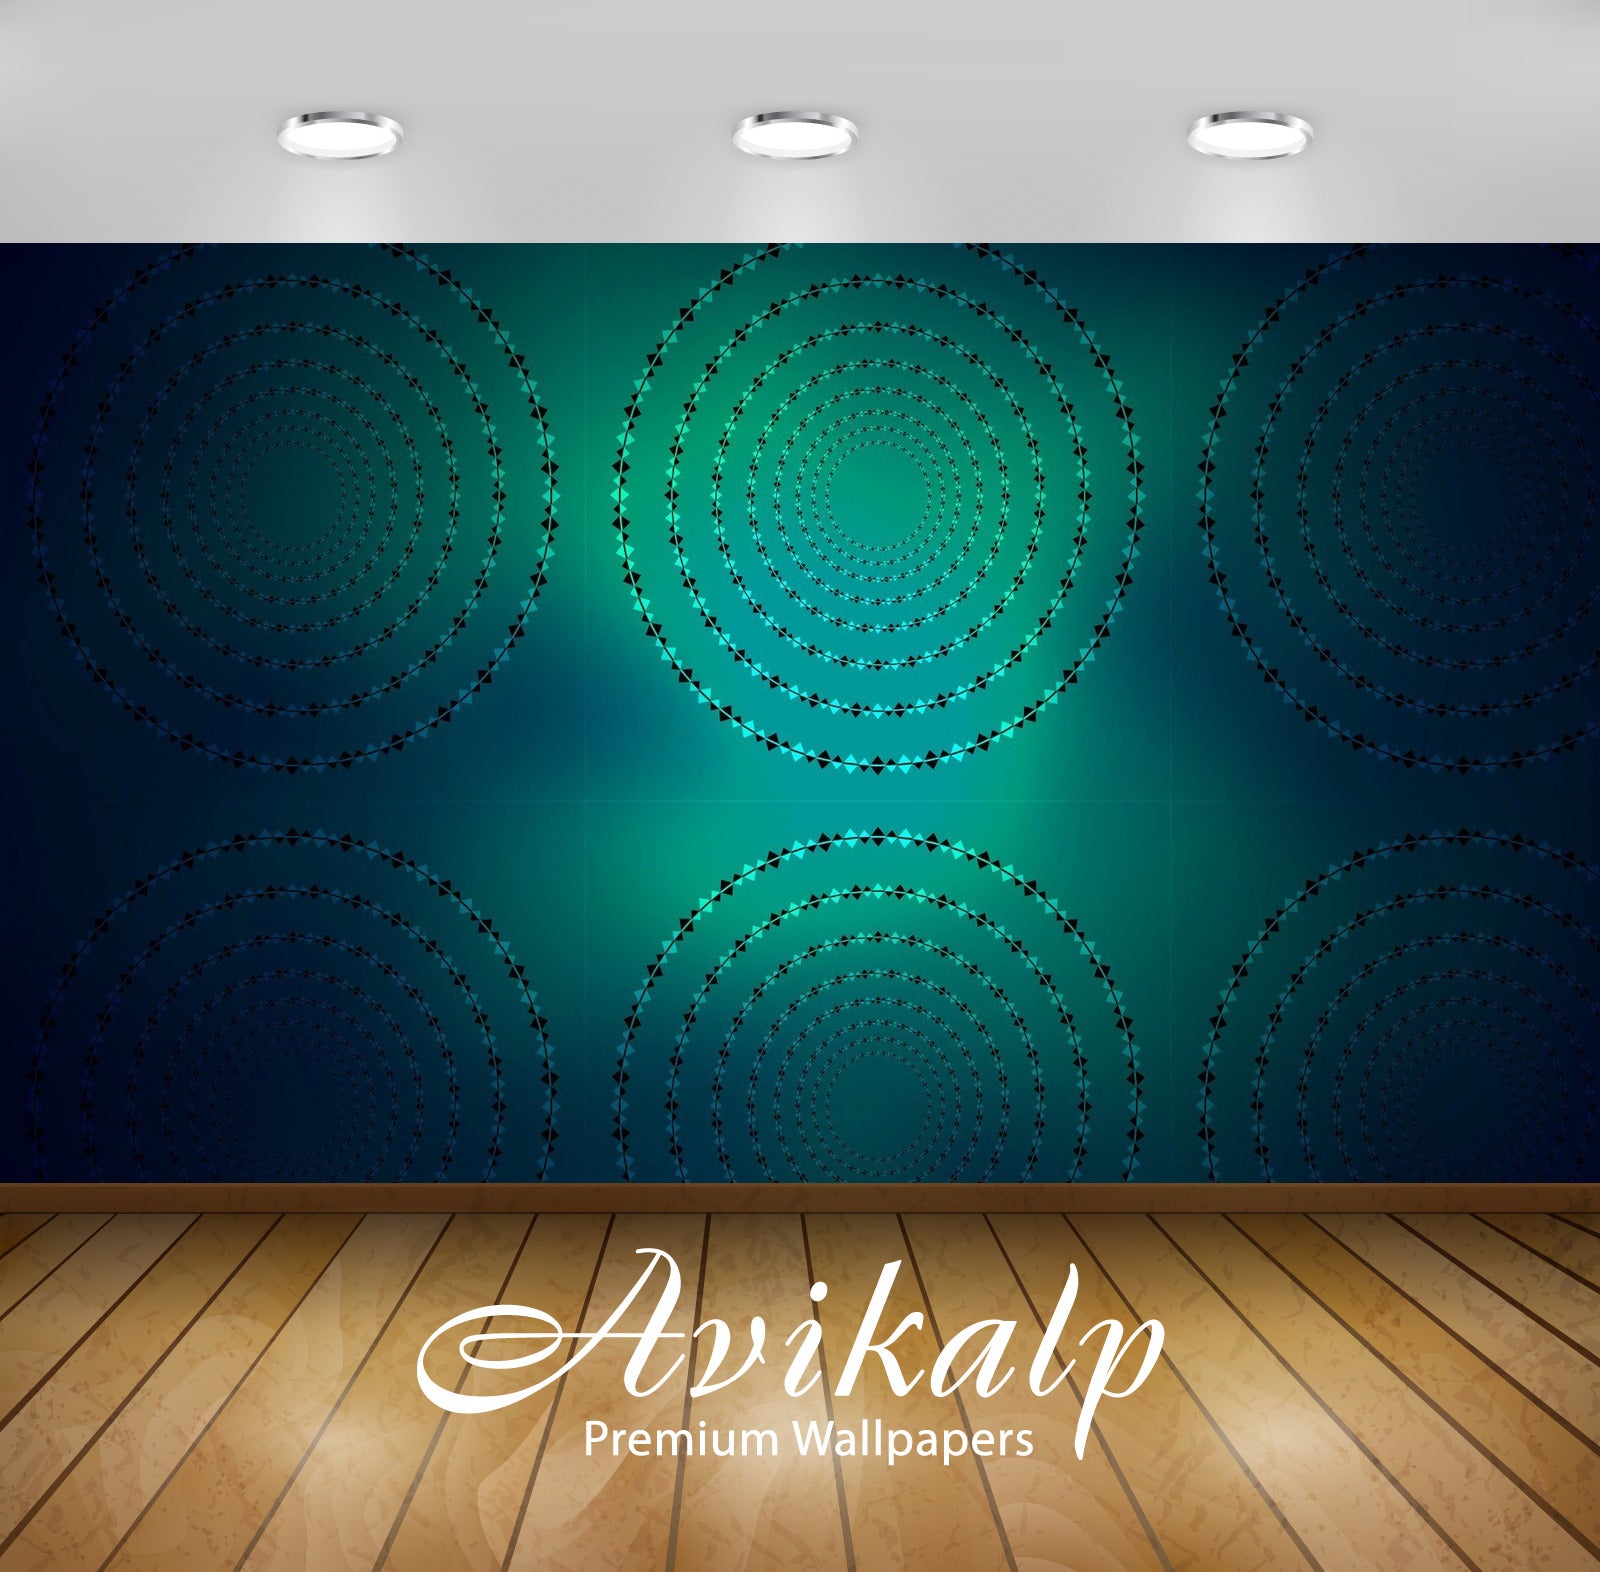 Avikalp Exclusive Awi4349 Fractal Circles Full HD Wallpapers for Living room, Hall, Kids Room, Kitch